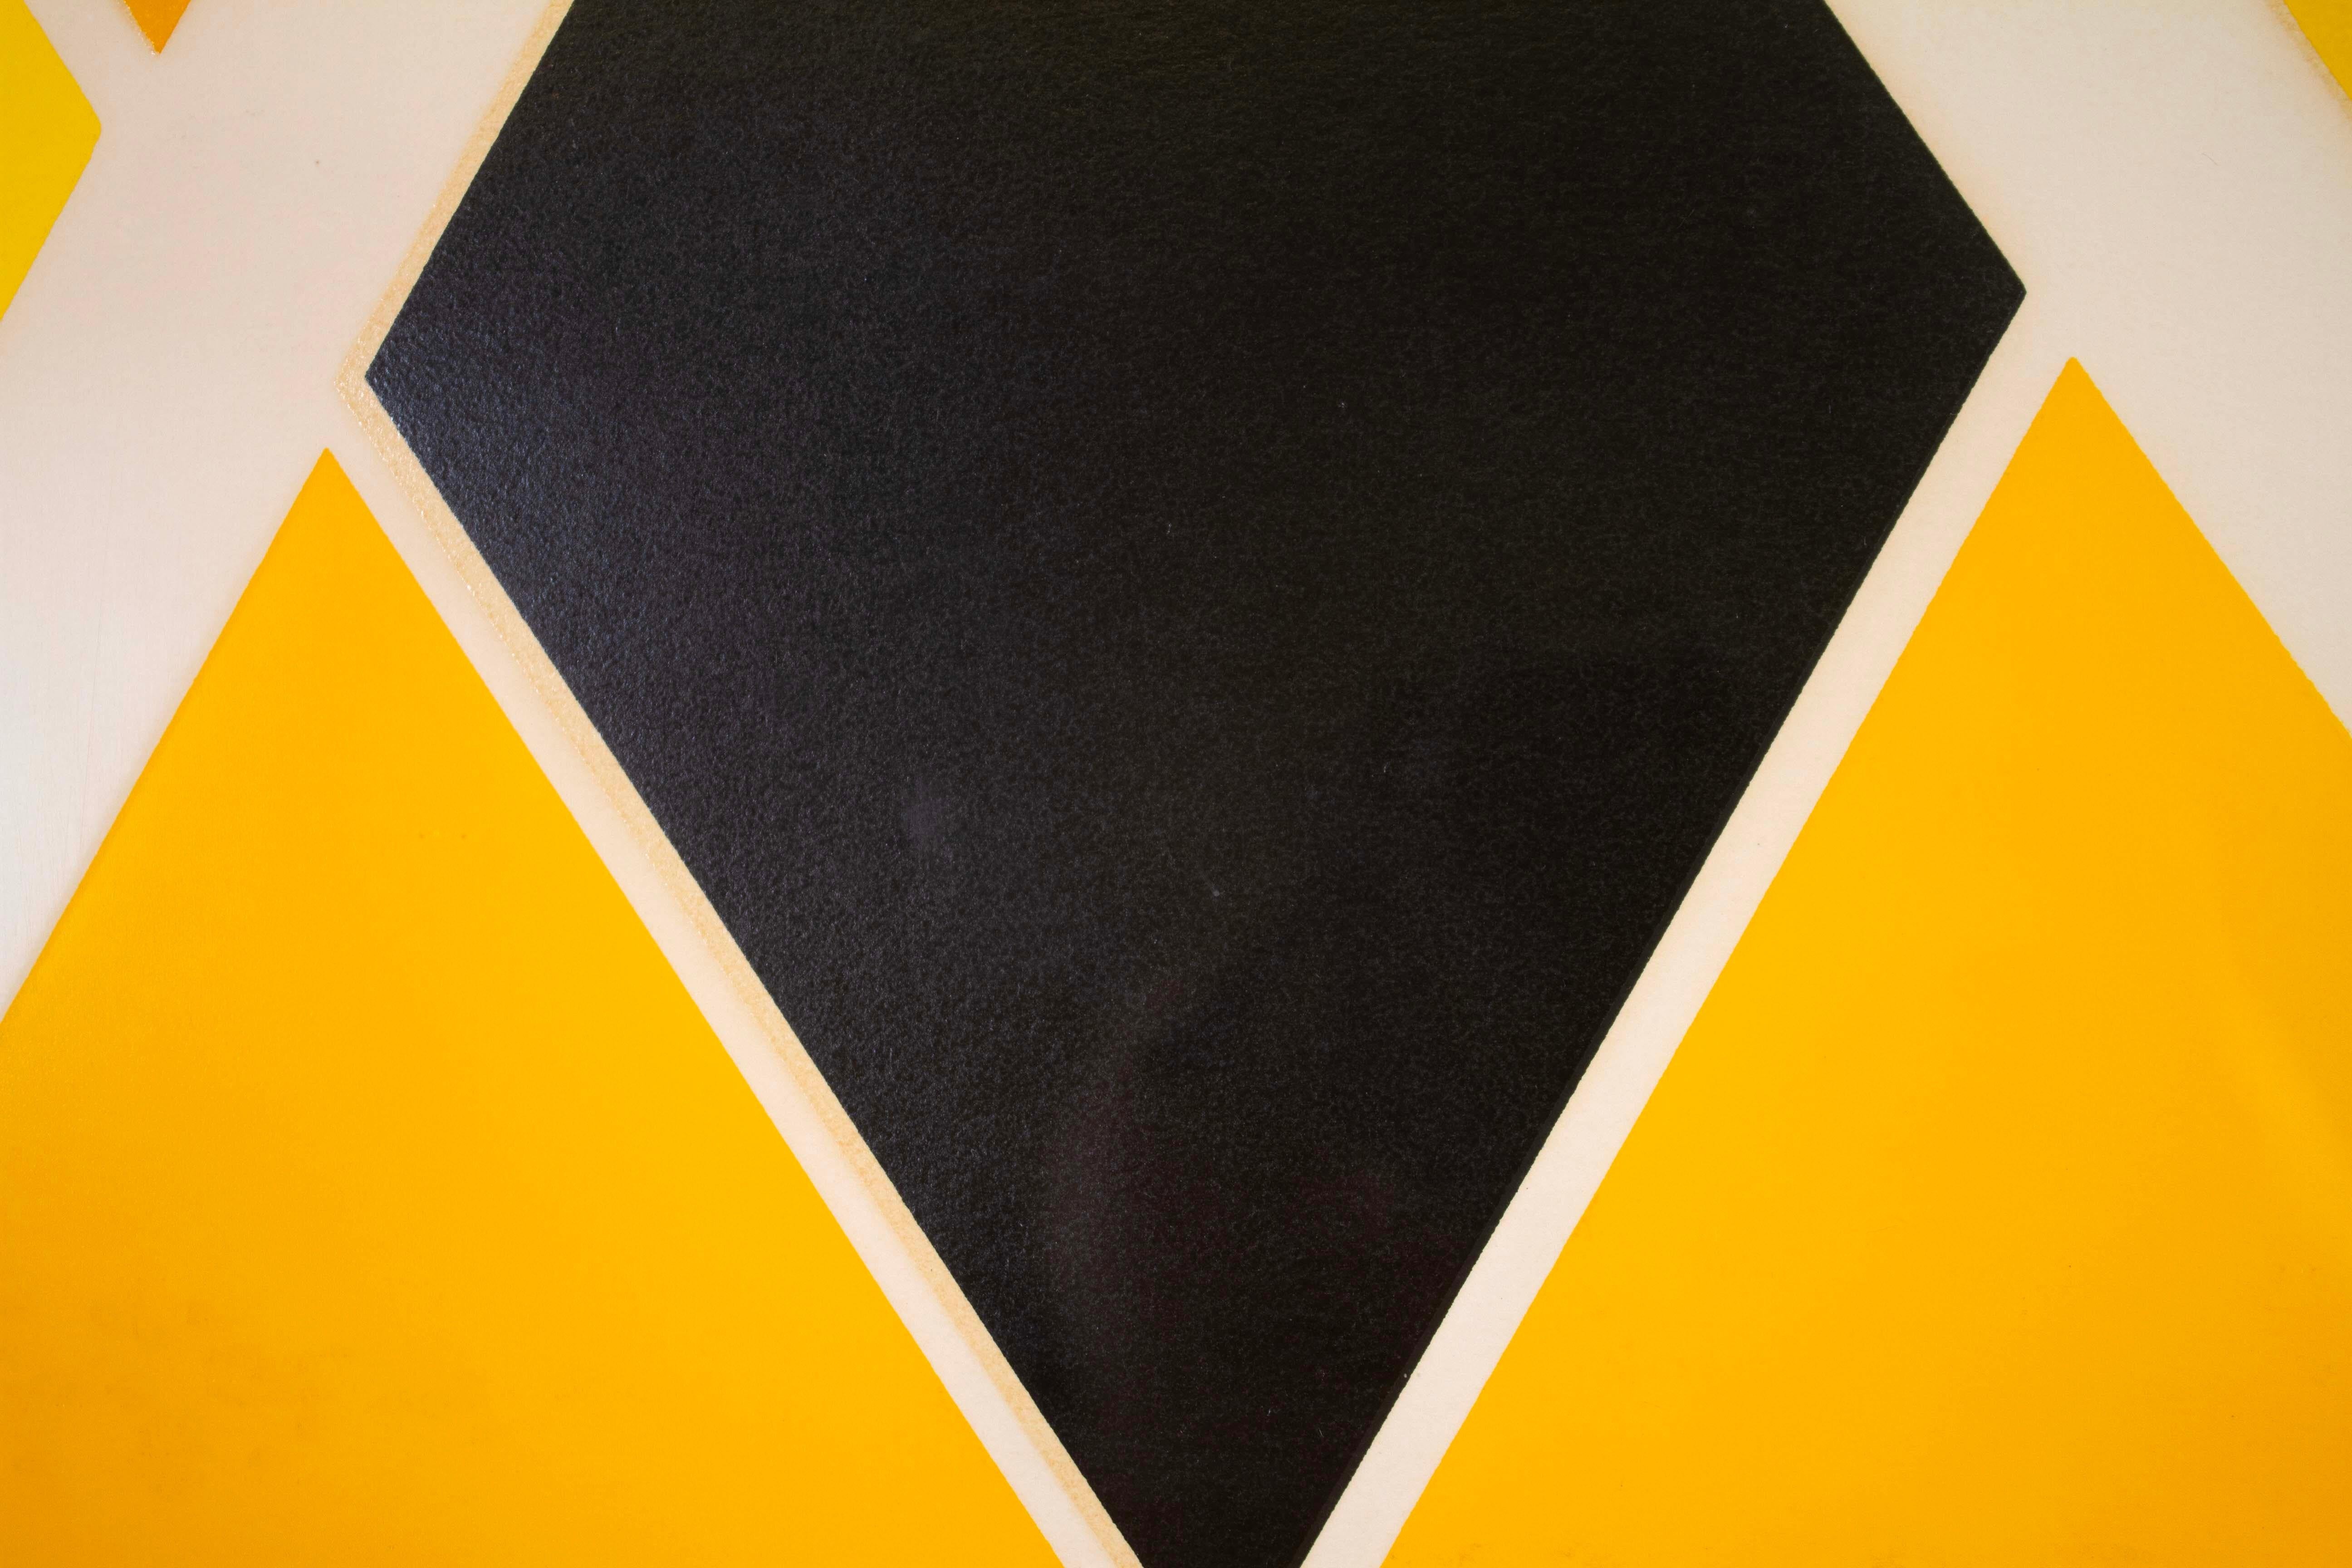 Larry Zox Diamond Drill (Yellow, Black, & White) Signed Modern Serigraph In Good Condition For Sale In Keego Harbor, MI